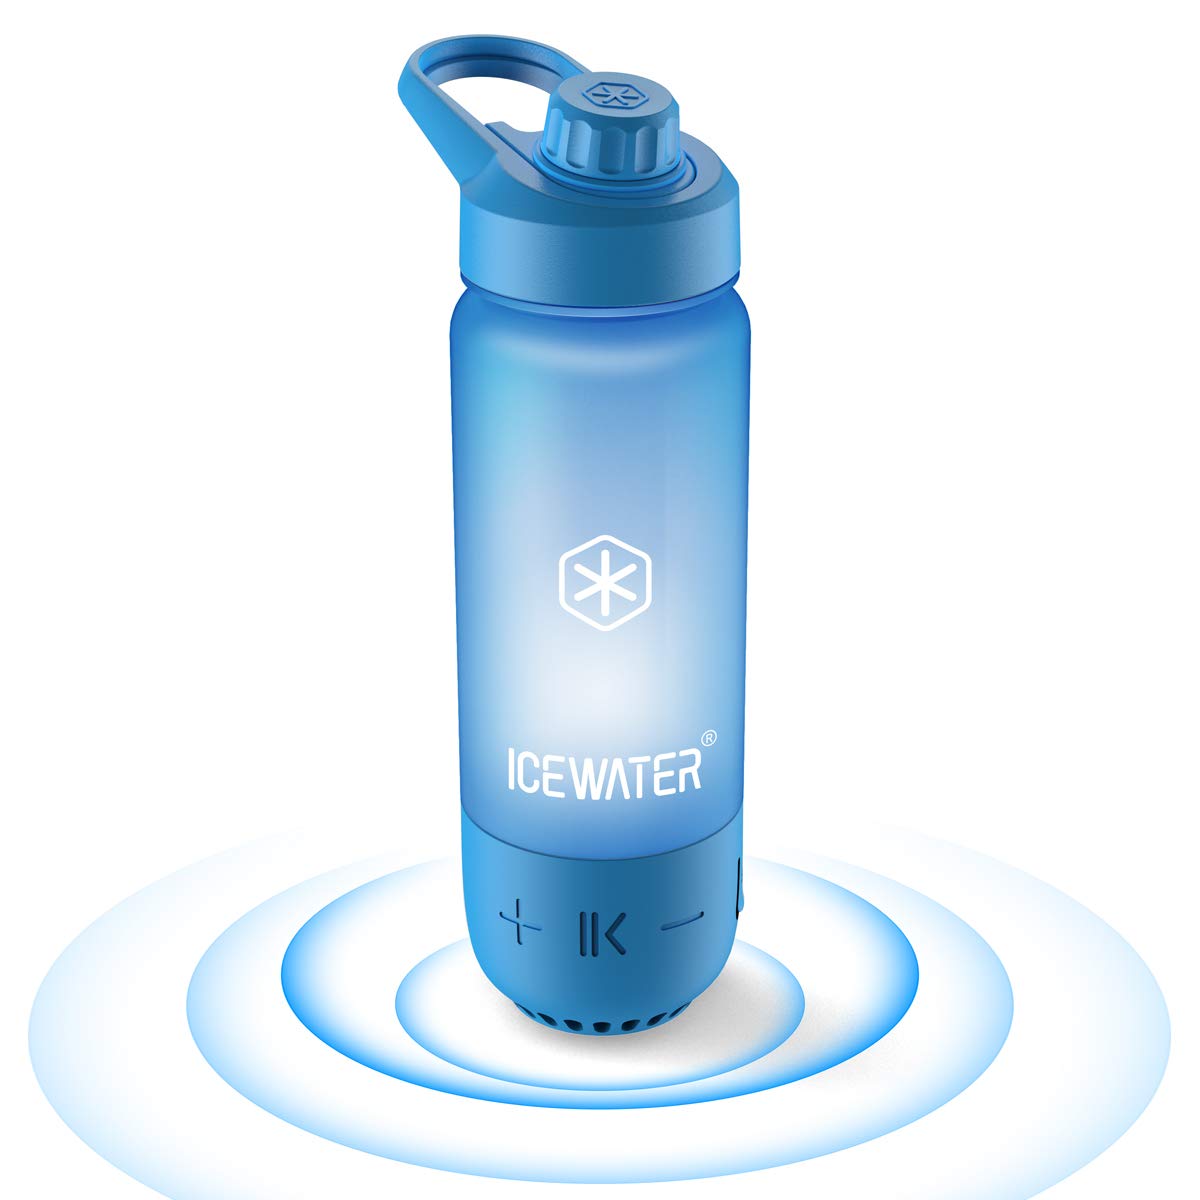 ICEWATER 3-in-1 Smart Water Bottle, Glows to Remind You to Keep Hydrated, Bluetooth Speaker & Dancing Lights, Plastic Water Bottle With Soft Auto Straw Lid, Great Gift (20 oz, Blue)